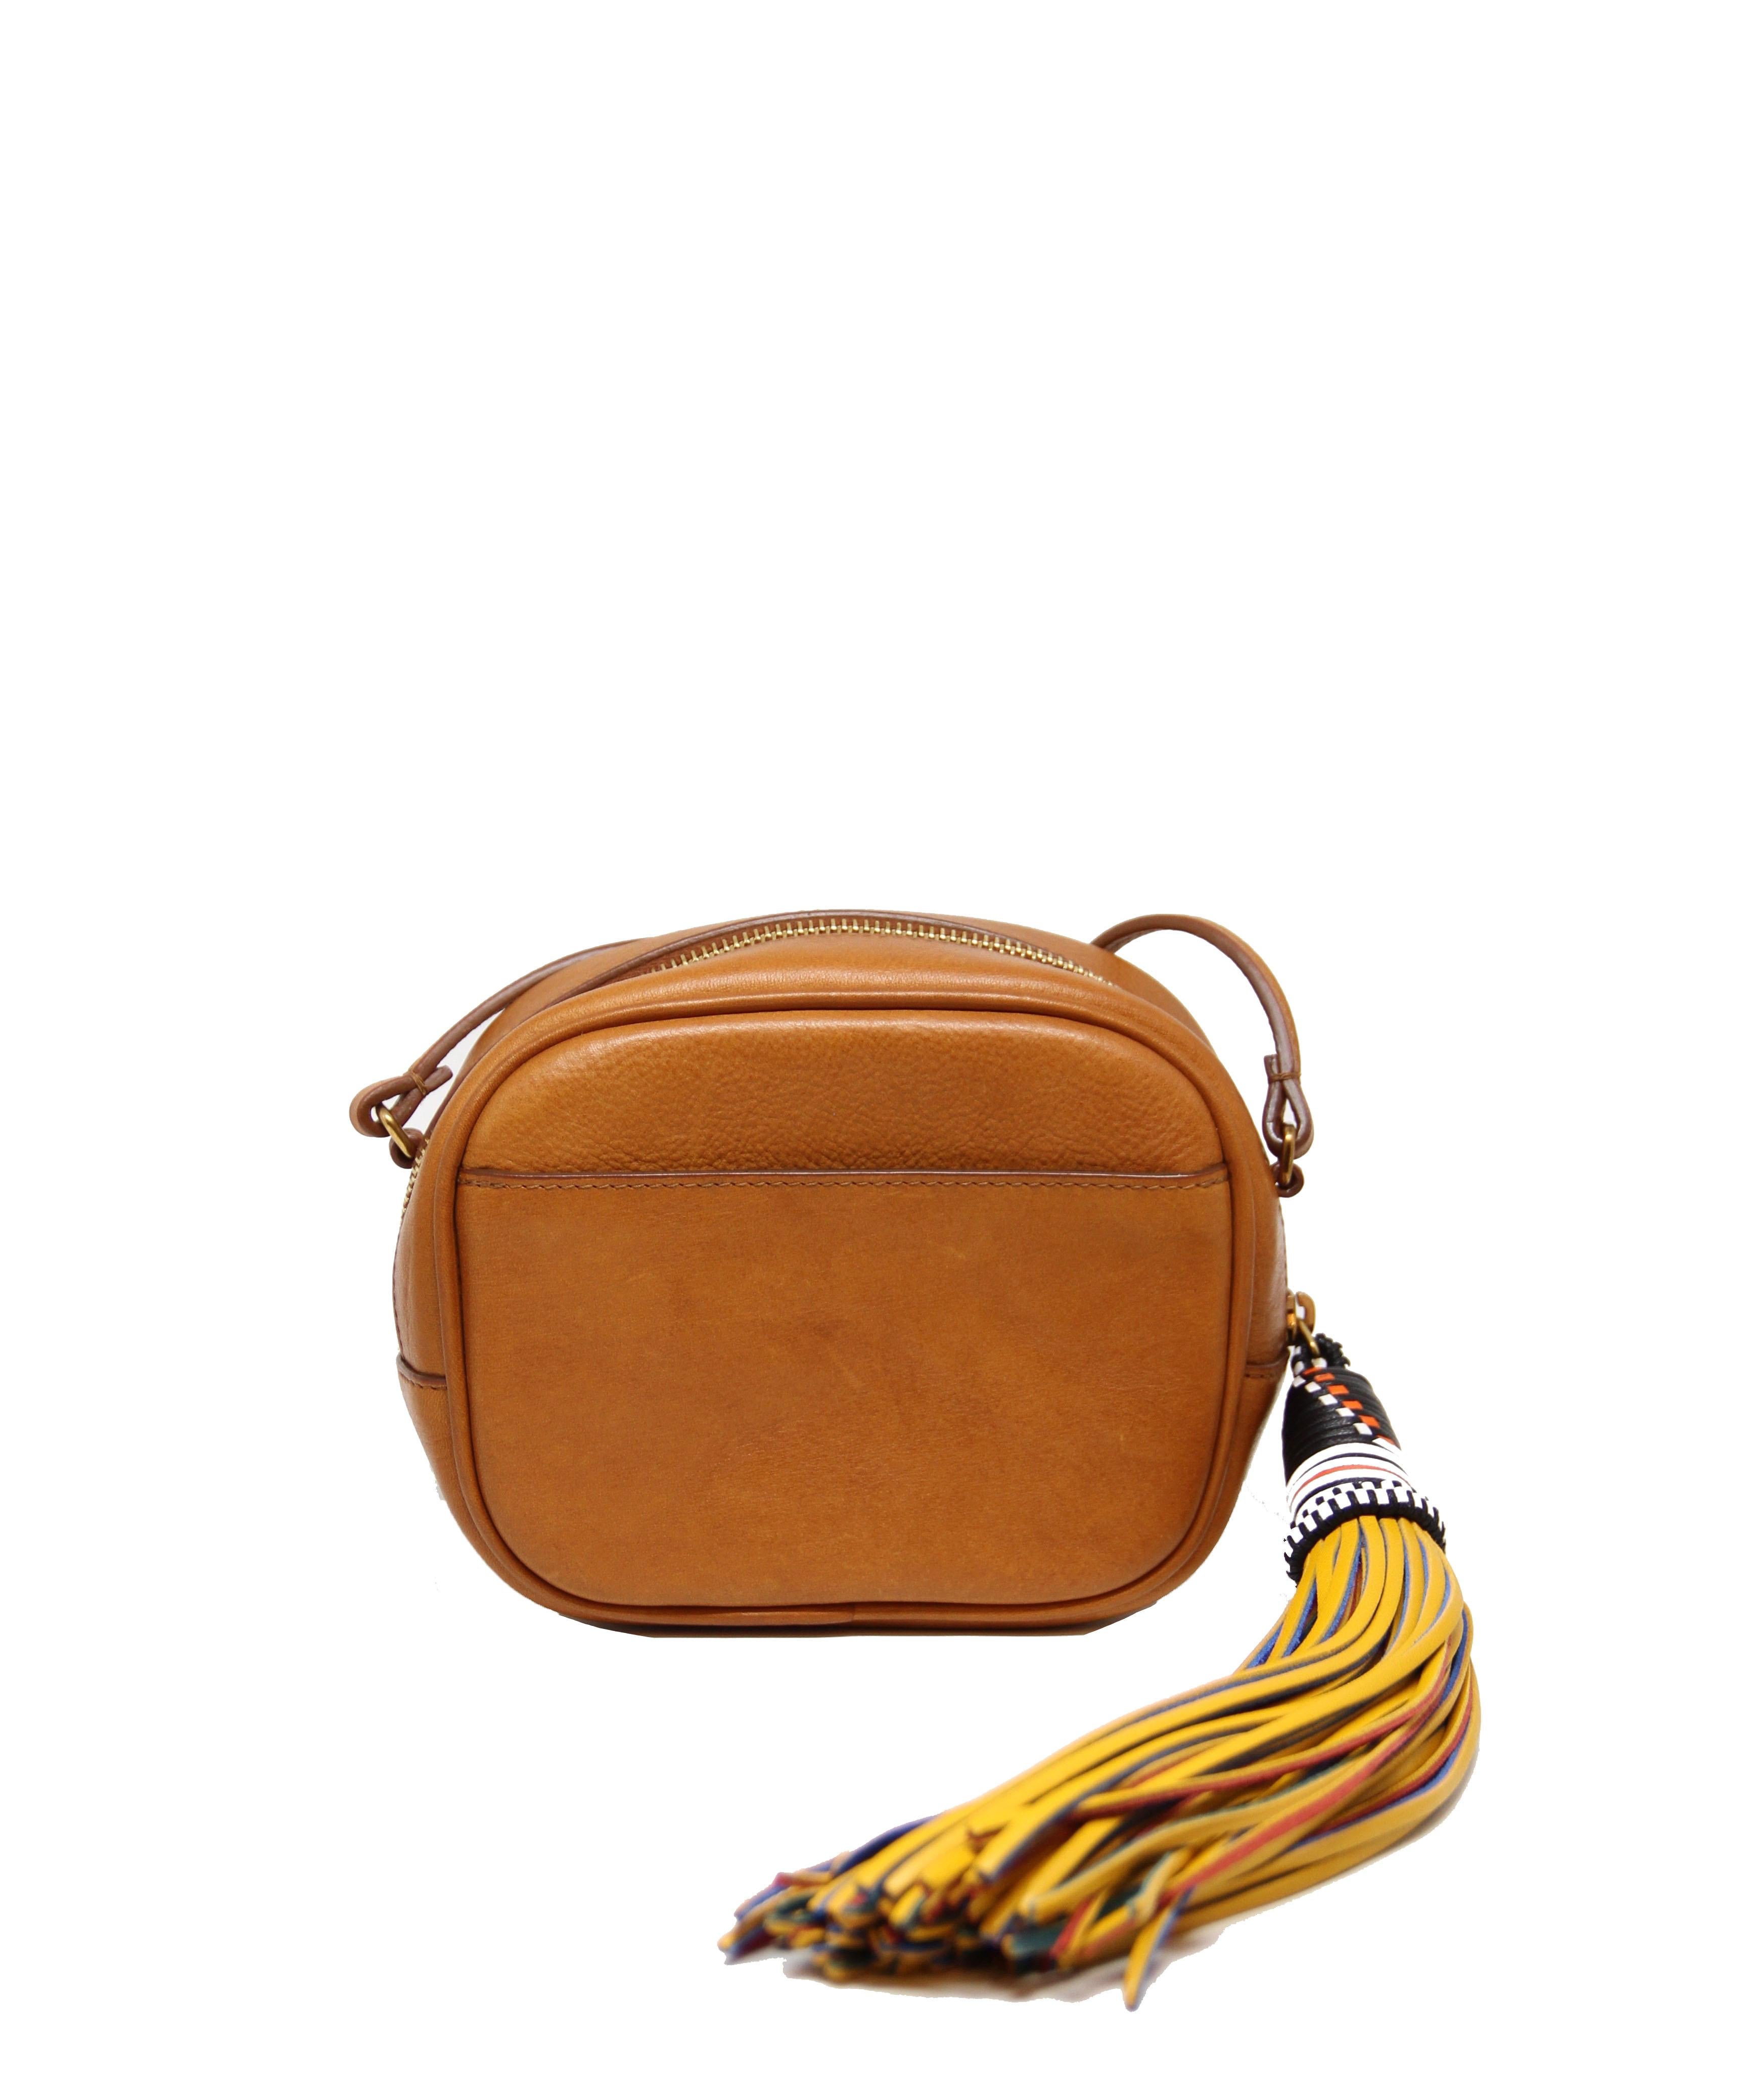 This Limited Edition of the classic monogram Saint Laurent shoulder bag is made of natural leather in a gold color, a multicolor leather oversized tassle and a fixed strap, 
It features a metal interlocking YSL signature.

Material: leather
Color: